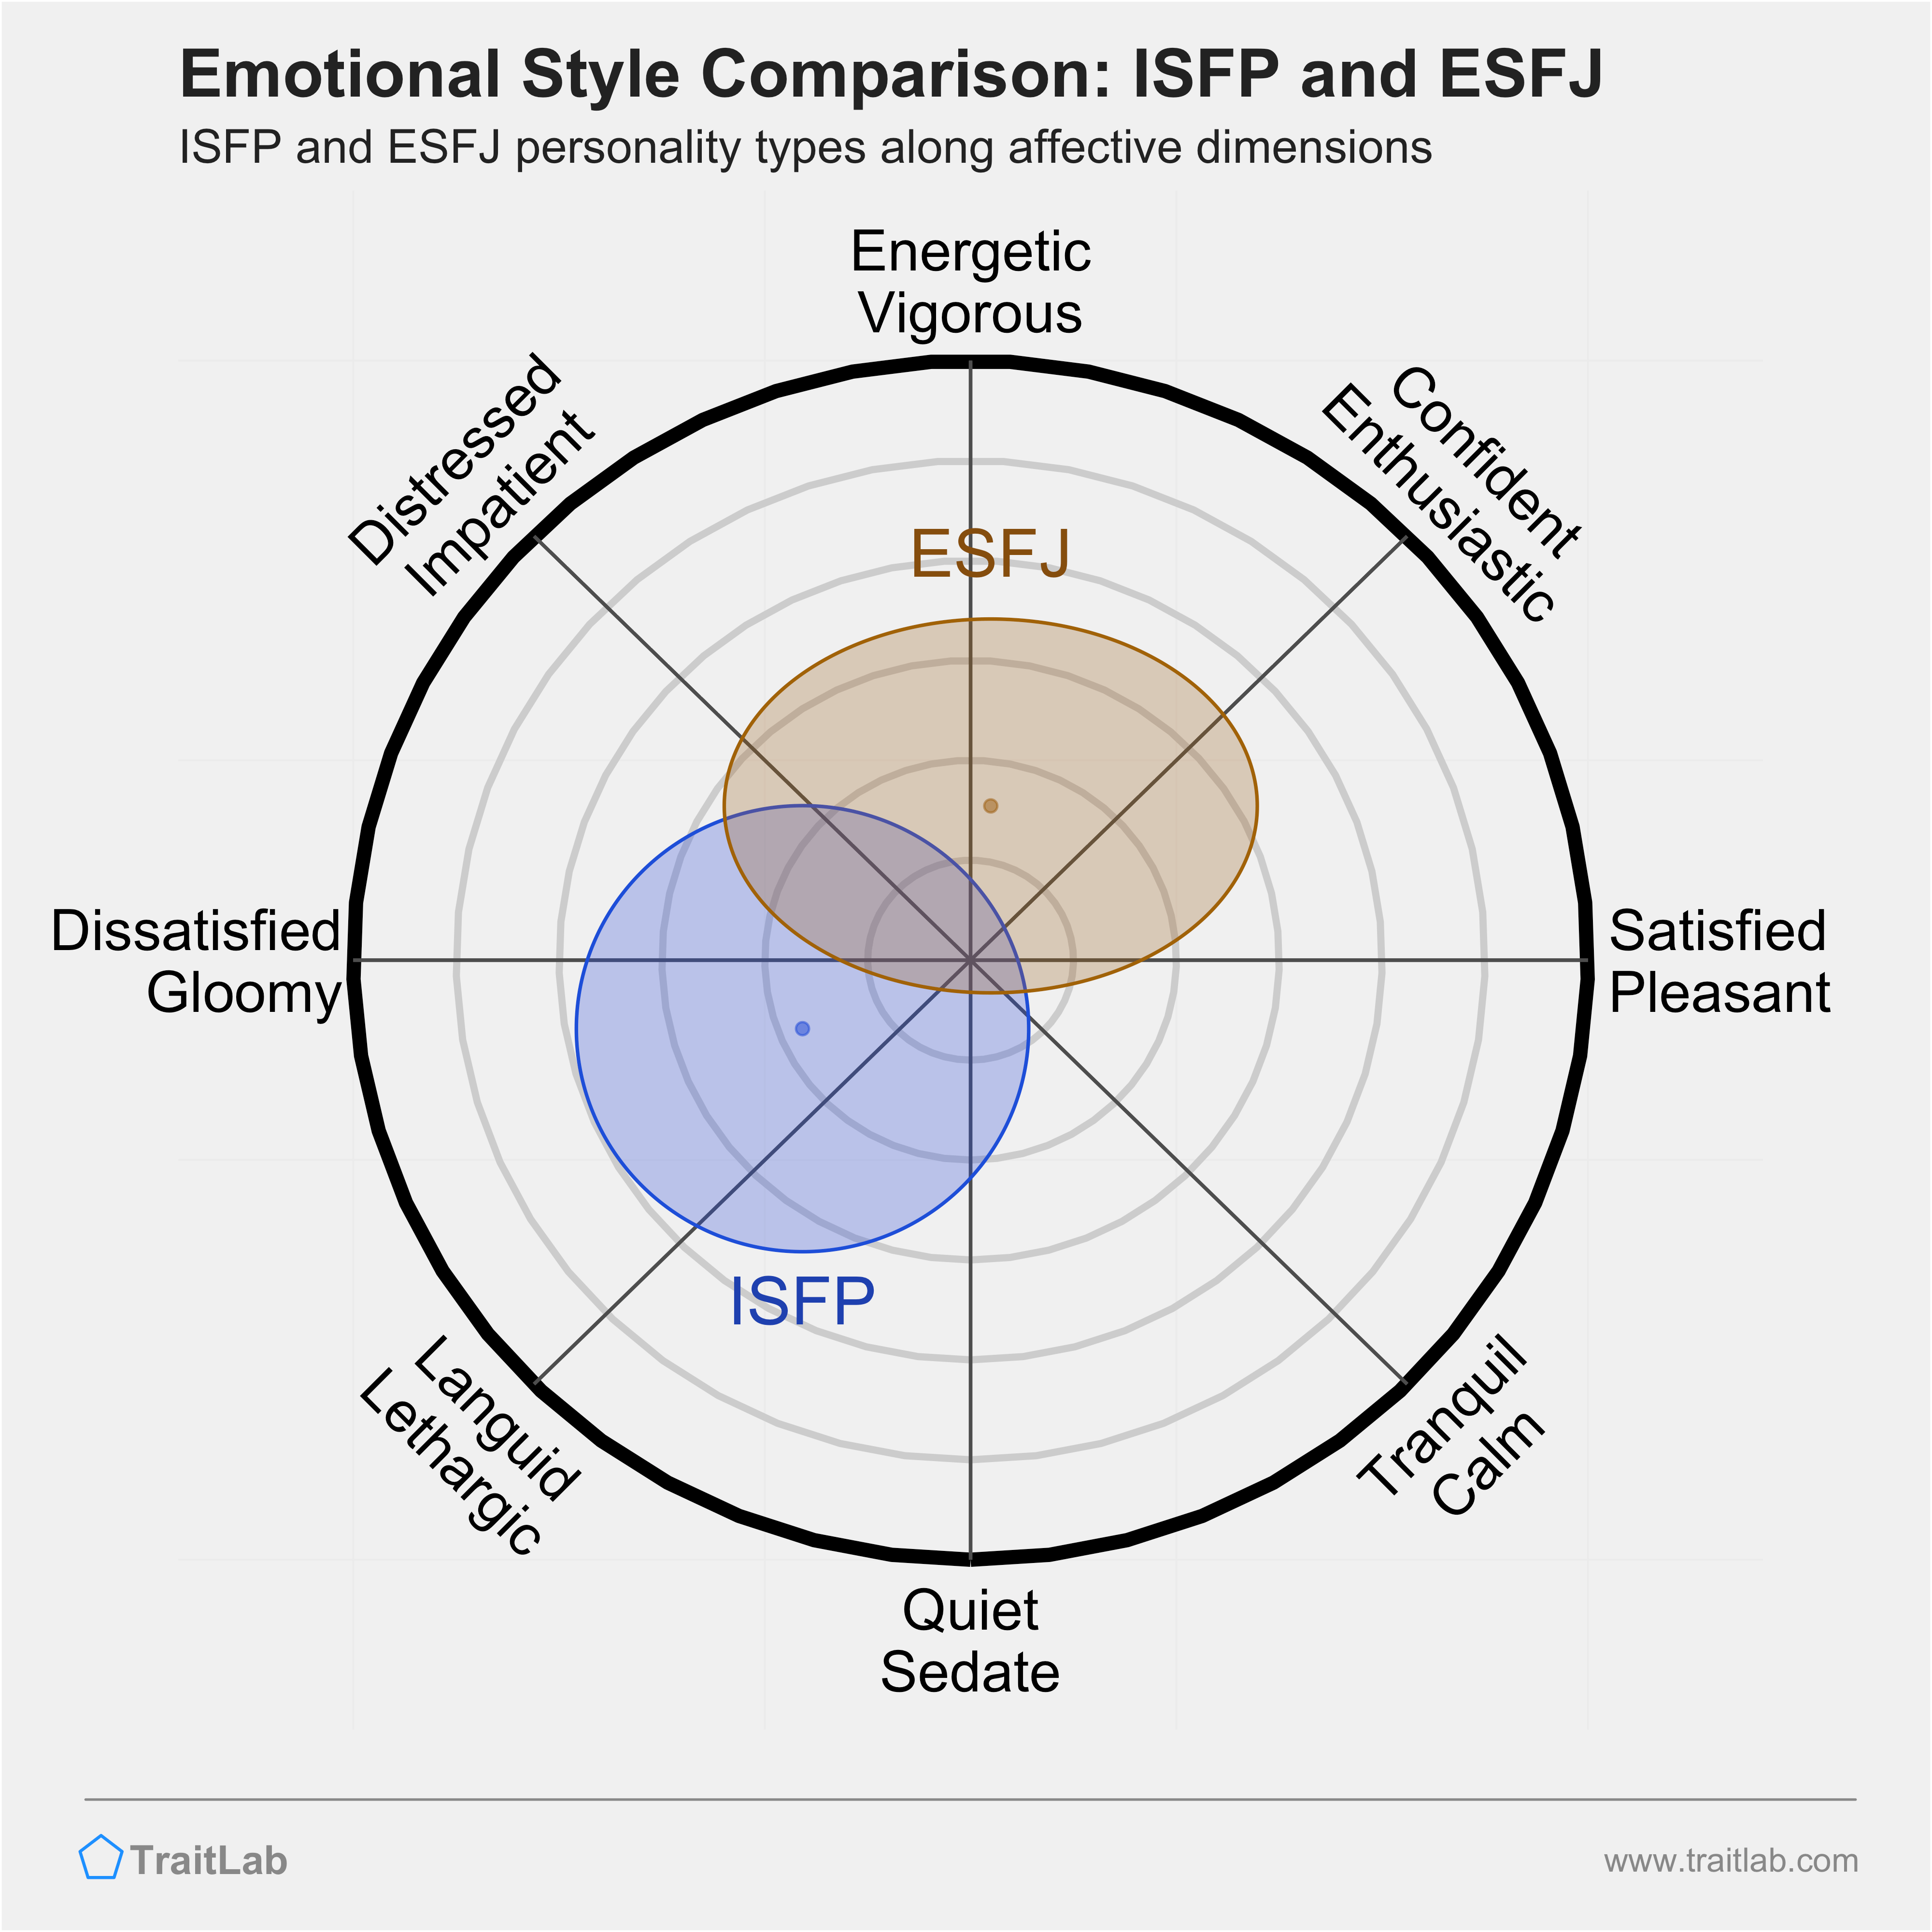 ISFP and ESFJ comparison across emotional (affective) dimensions